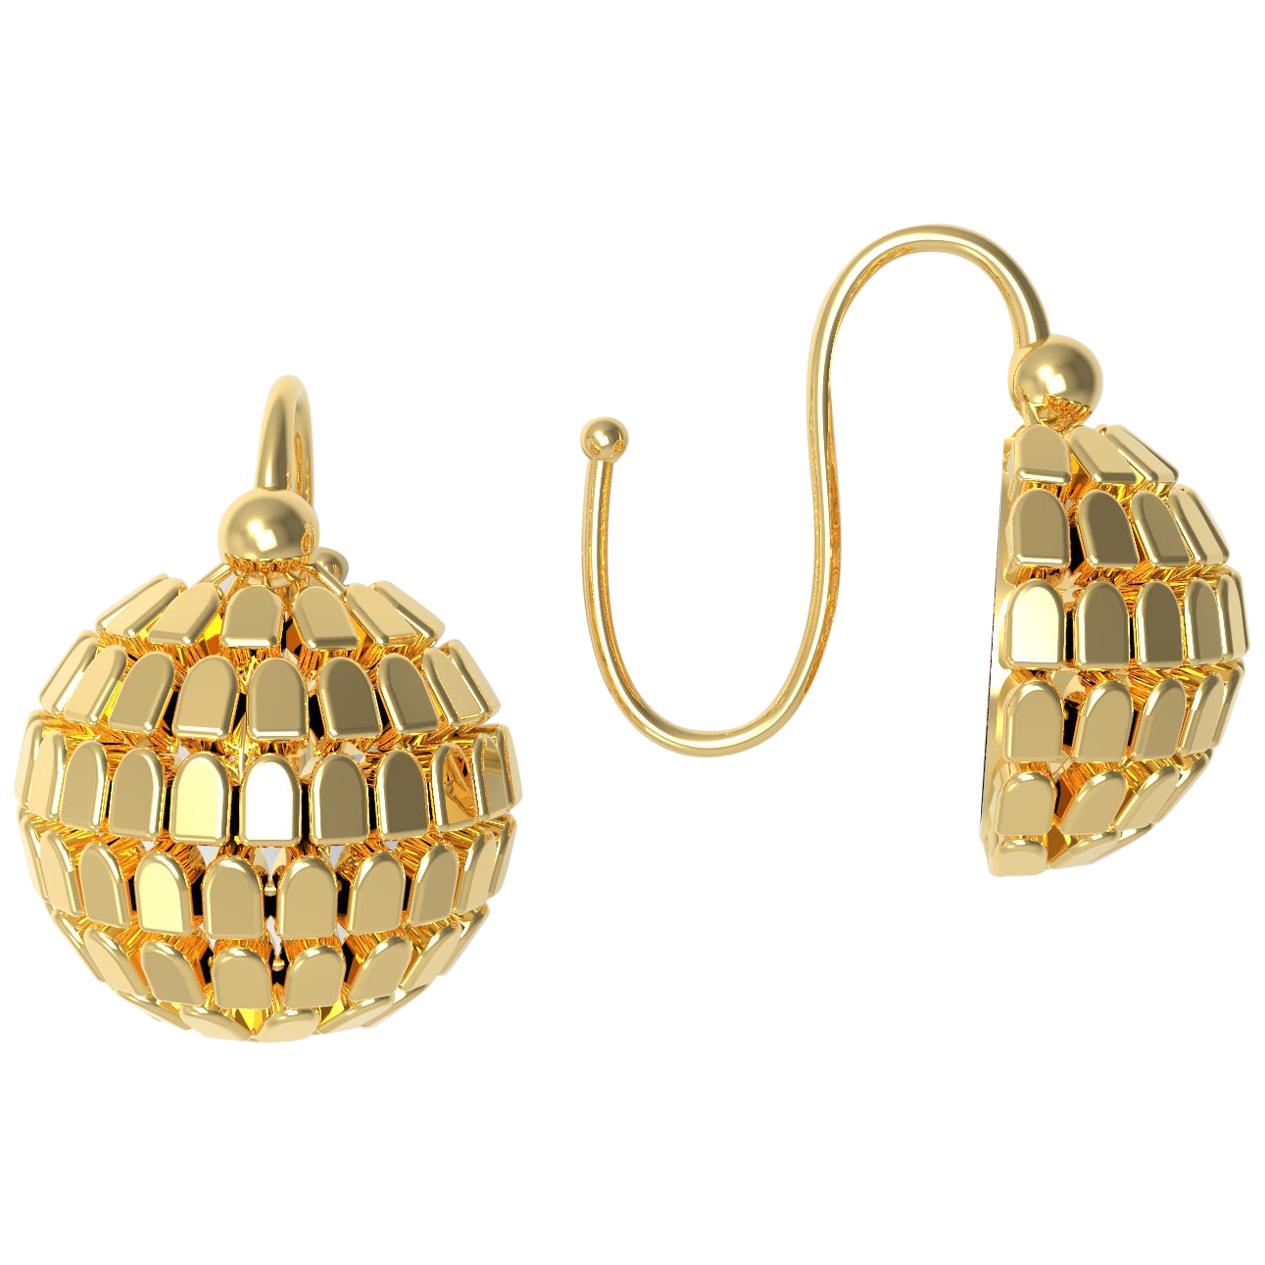 22 Karat Gold Shimmering Earrings by Romae Jewelry Inspired by Ancient Designs